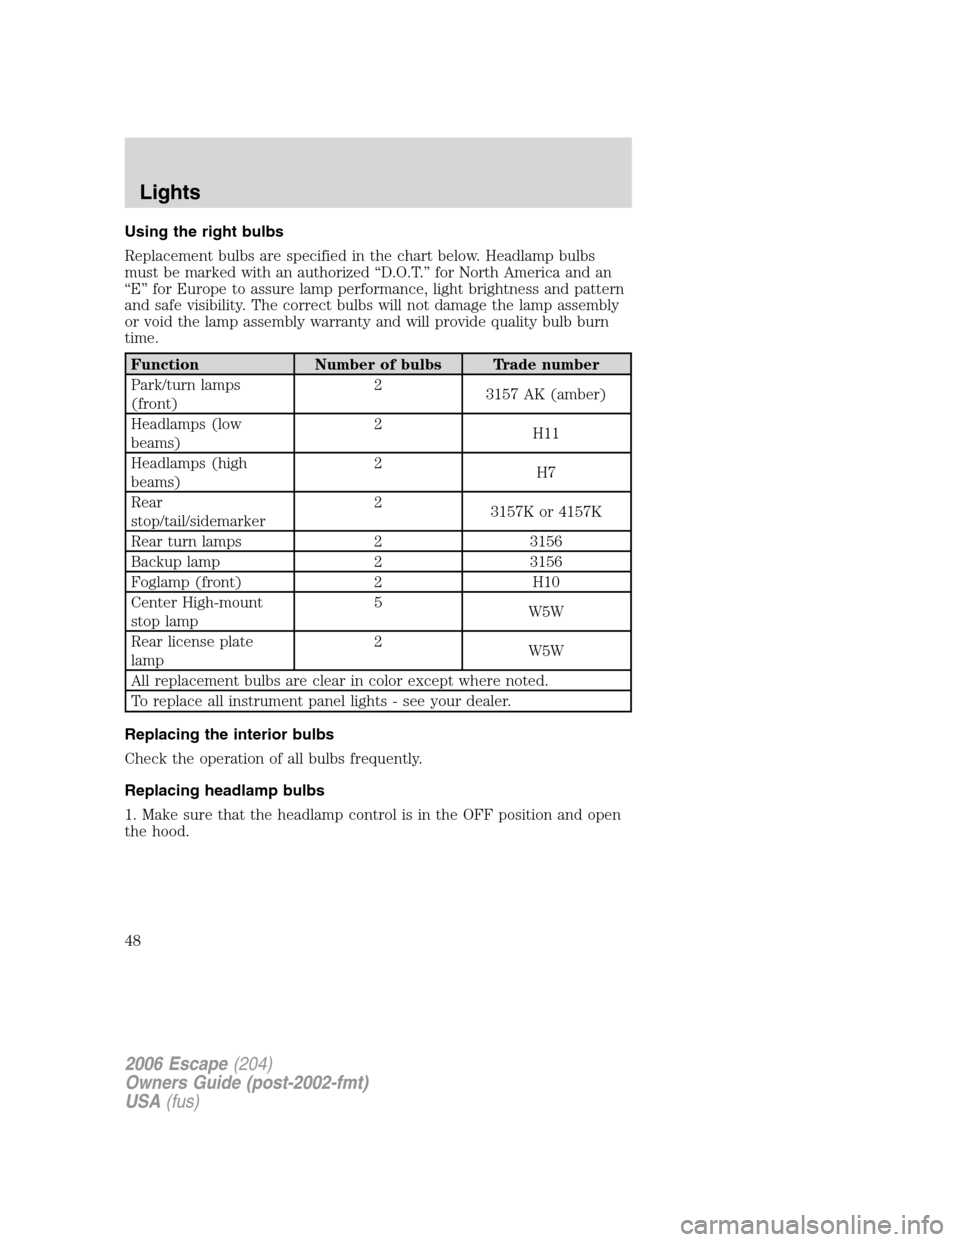 FORD ESCAPE 2006 1.G Owners Manual Using the right bulbs
Replacement bulbs are specified in the chart below. Headlamp bulbs
must be marked with an authorized “D.O.T.” for North America and an
“E” for Europe to assure lamp perfo